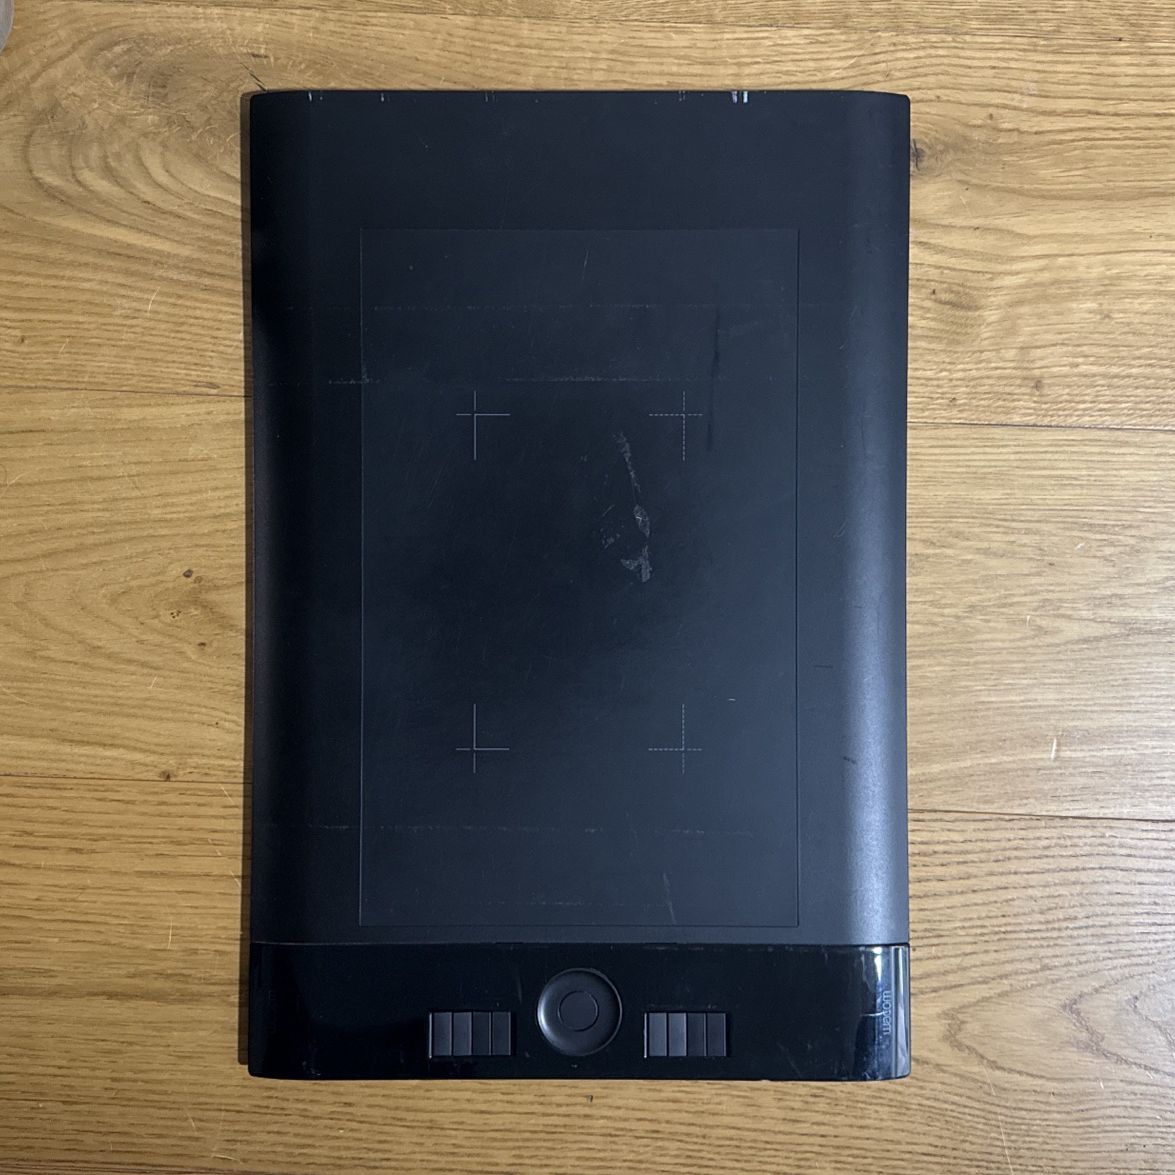 Wacom Intuos Pro Large Tablet